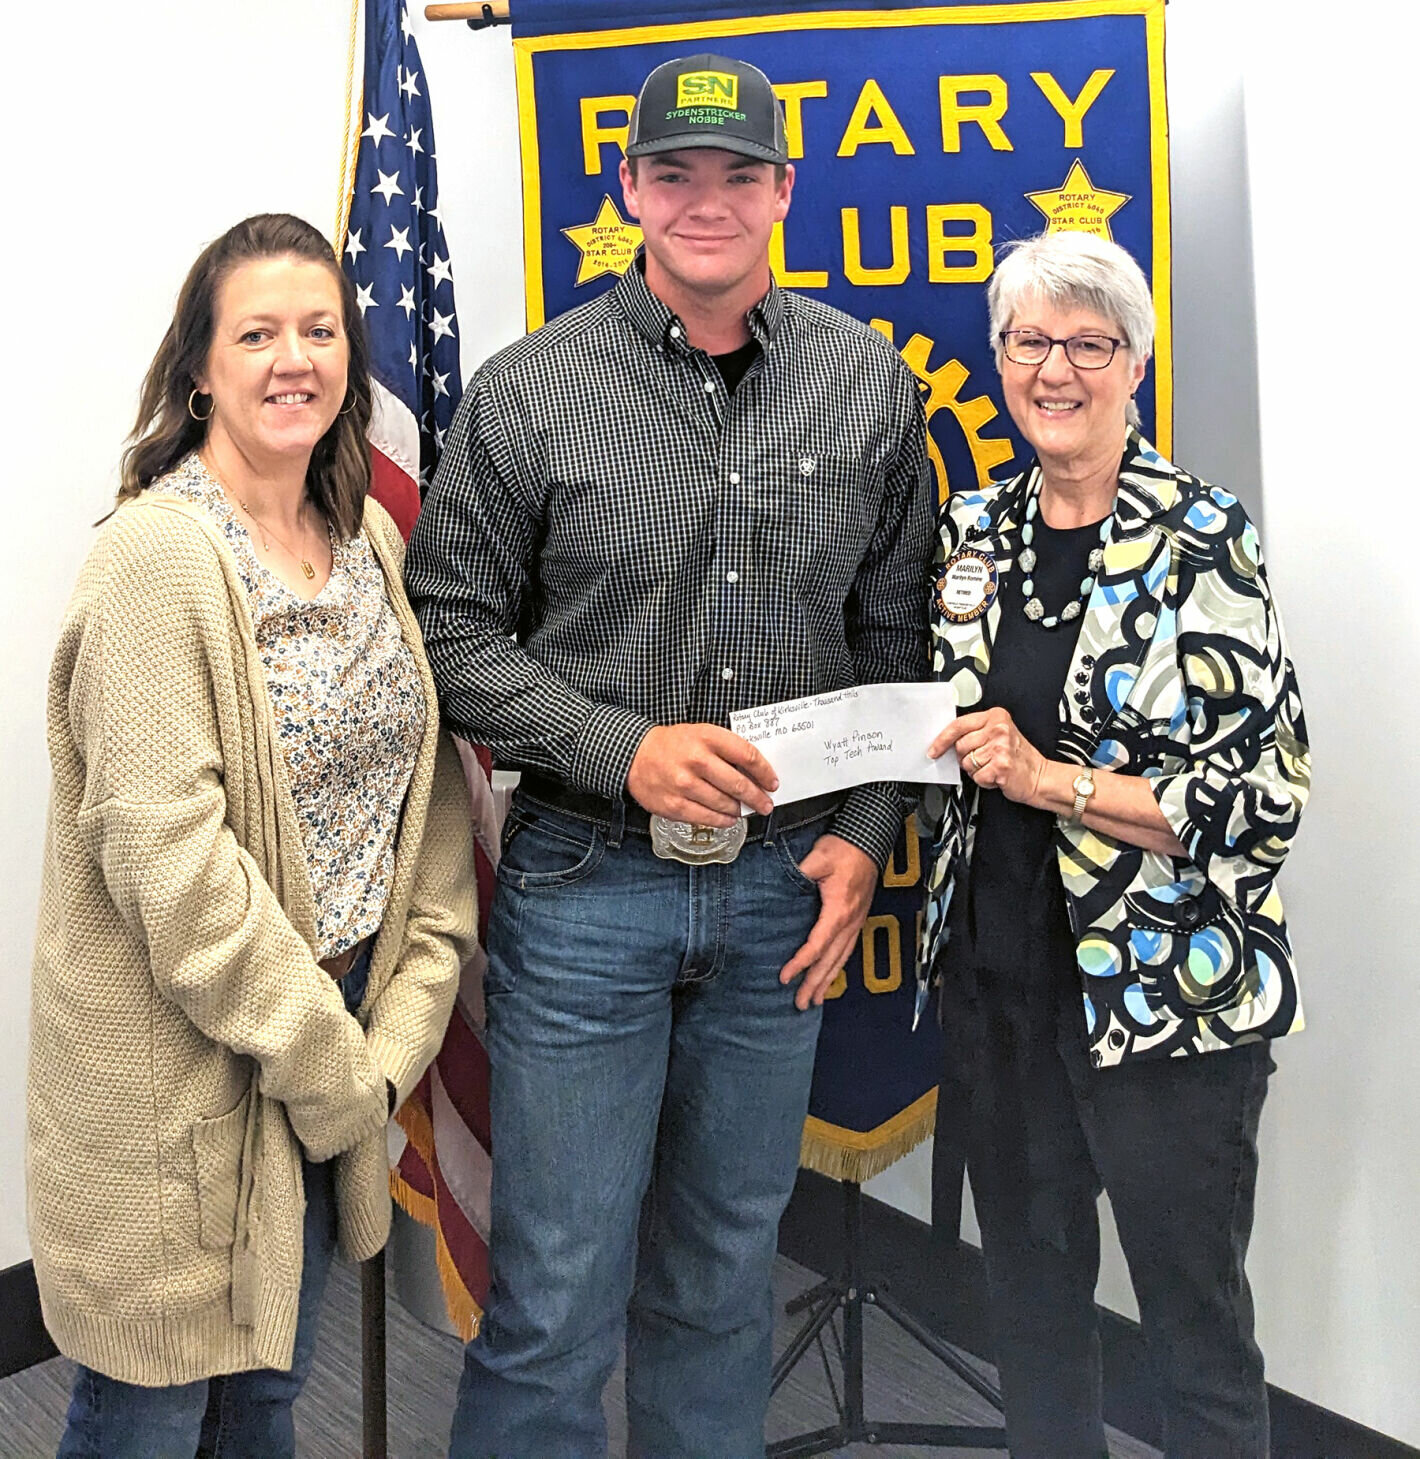 Wyatt Pinson (center) and his mother, Jessie Pinson (left) with Thousand Hills Rotary Club President Marilyn Romine.